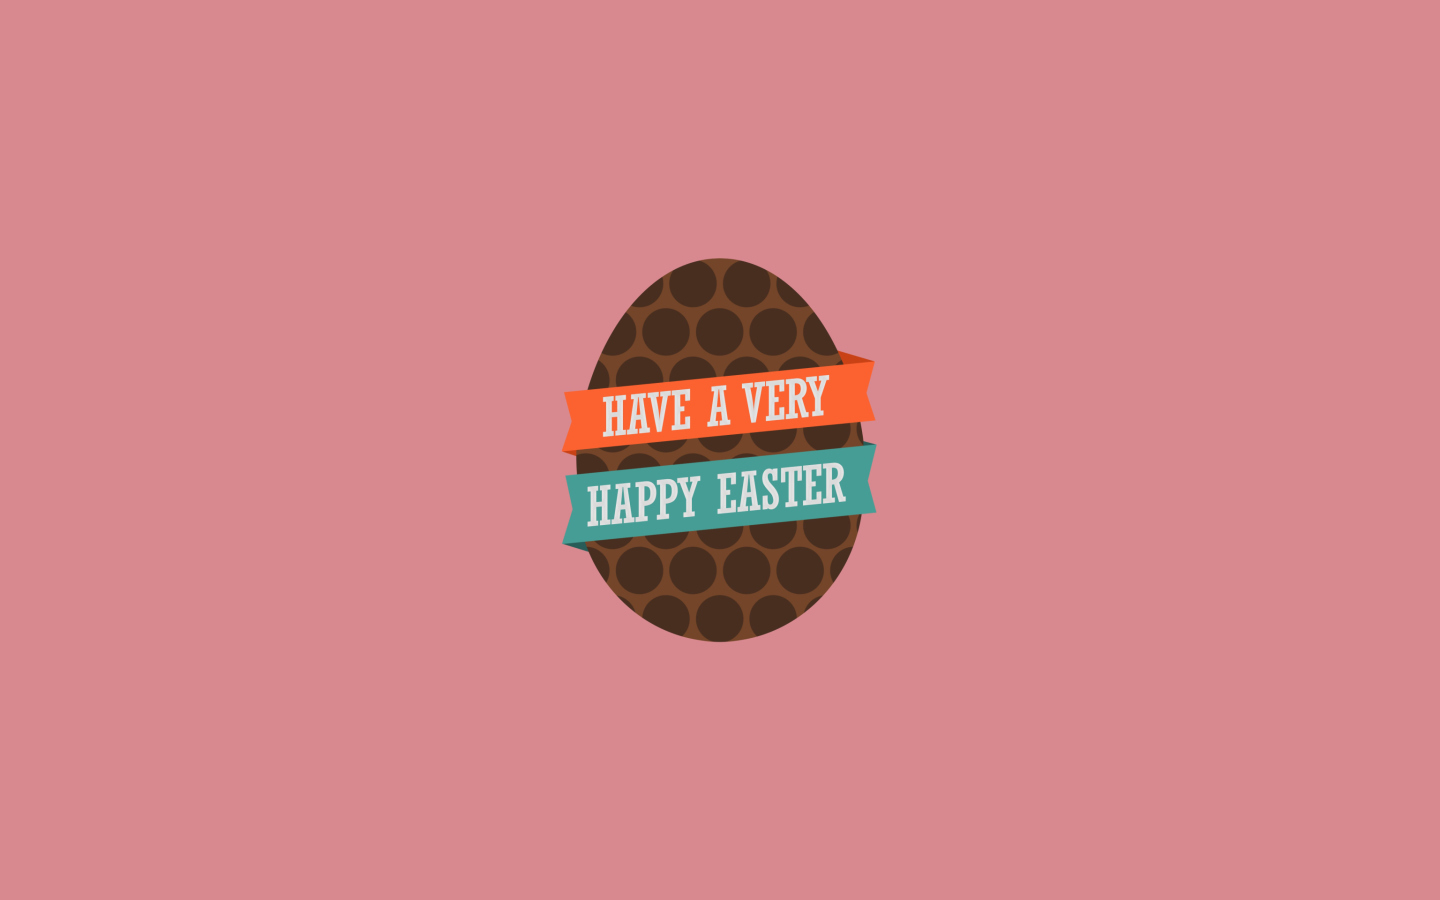 Very Happy Easter Egg wallpaper 1440x900